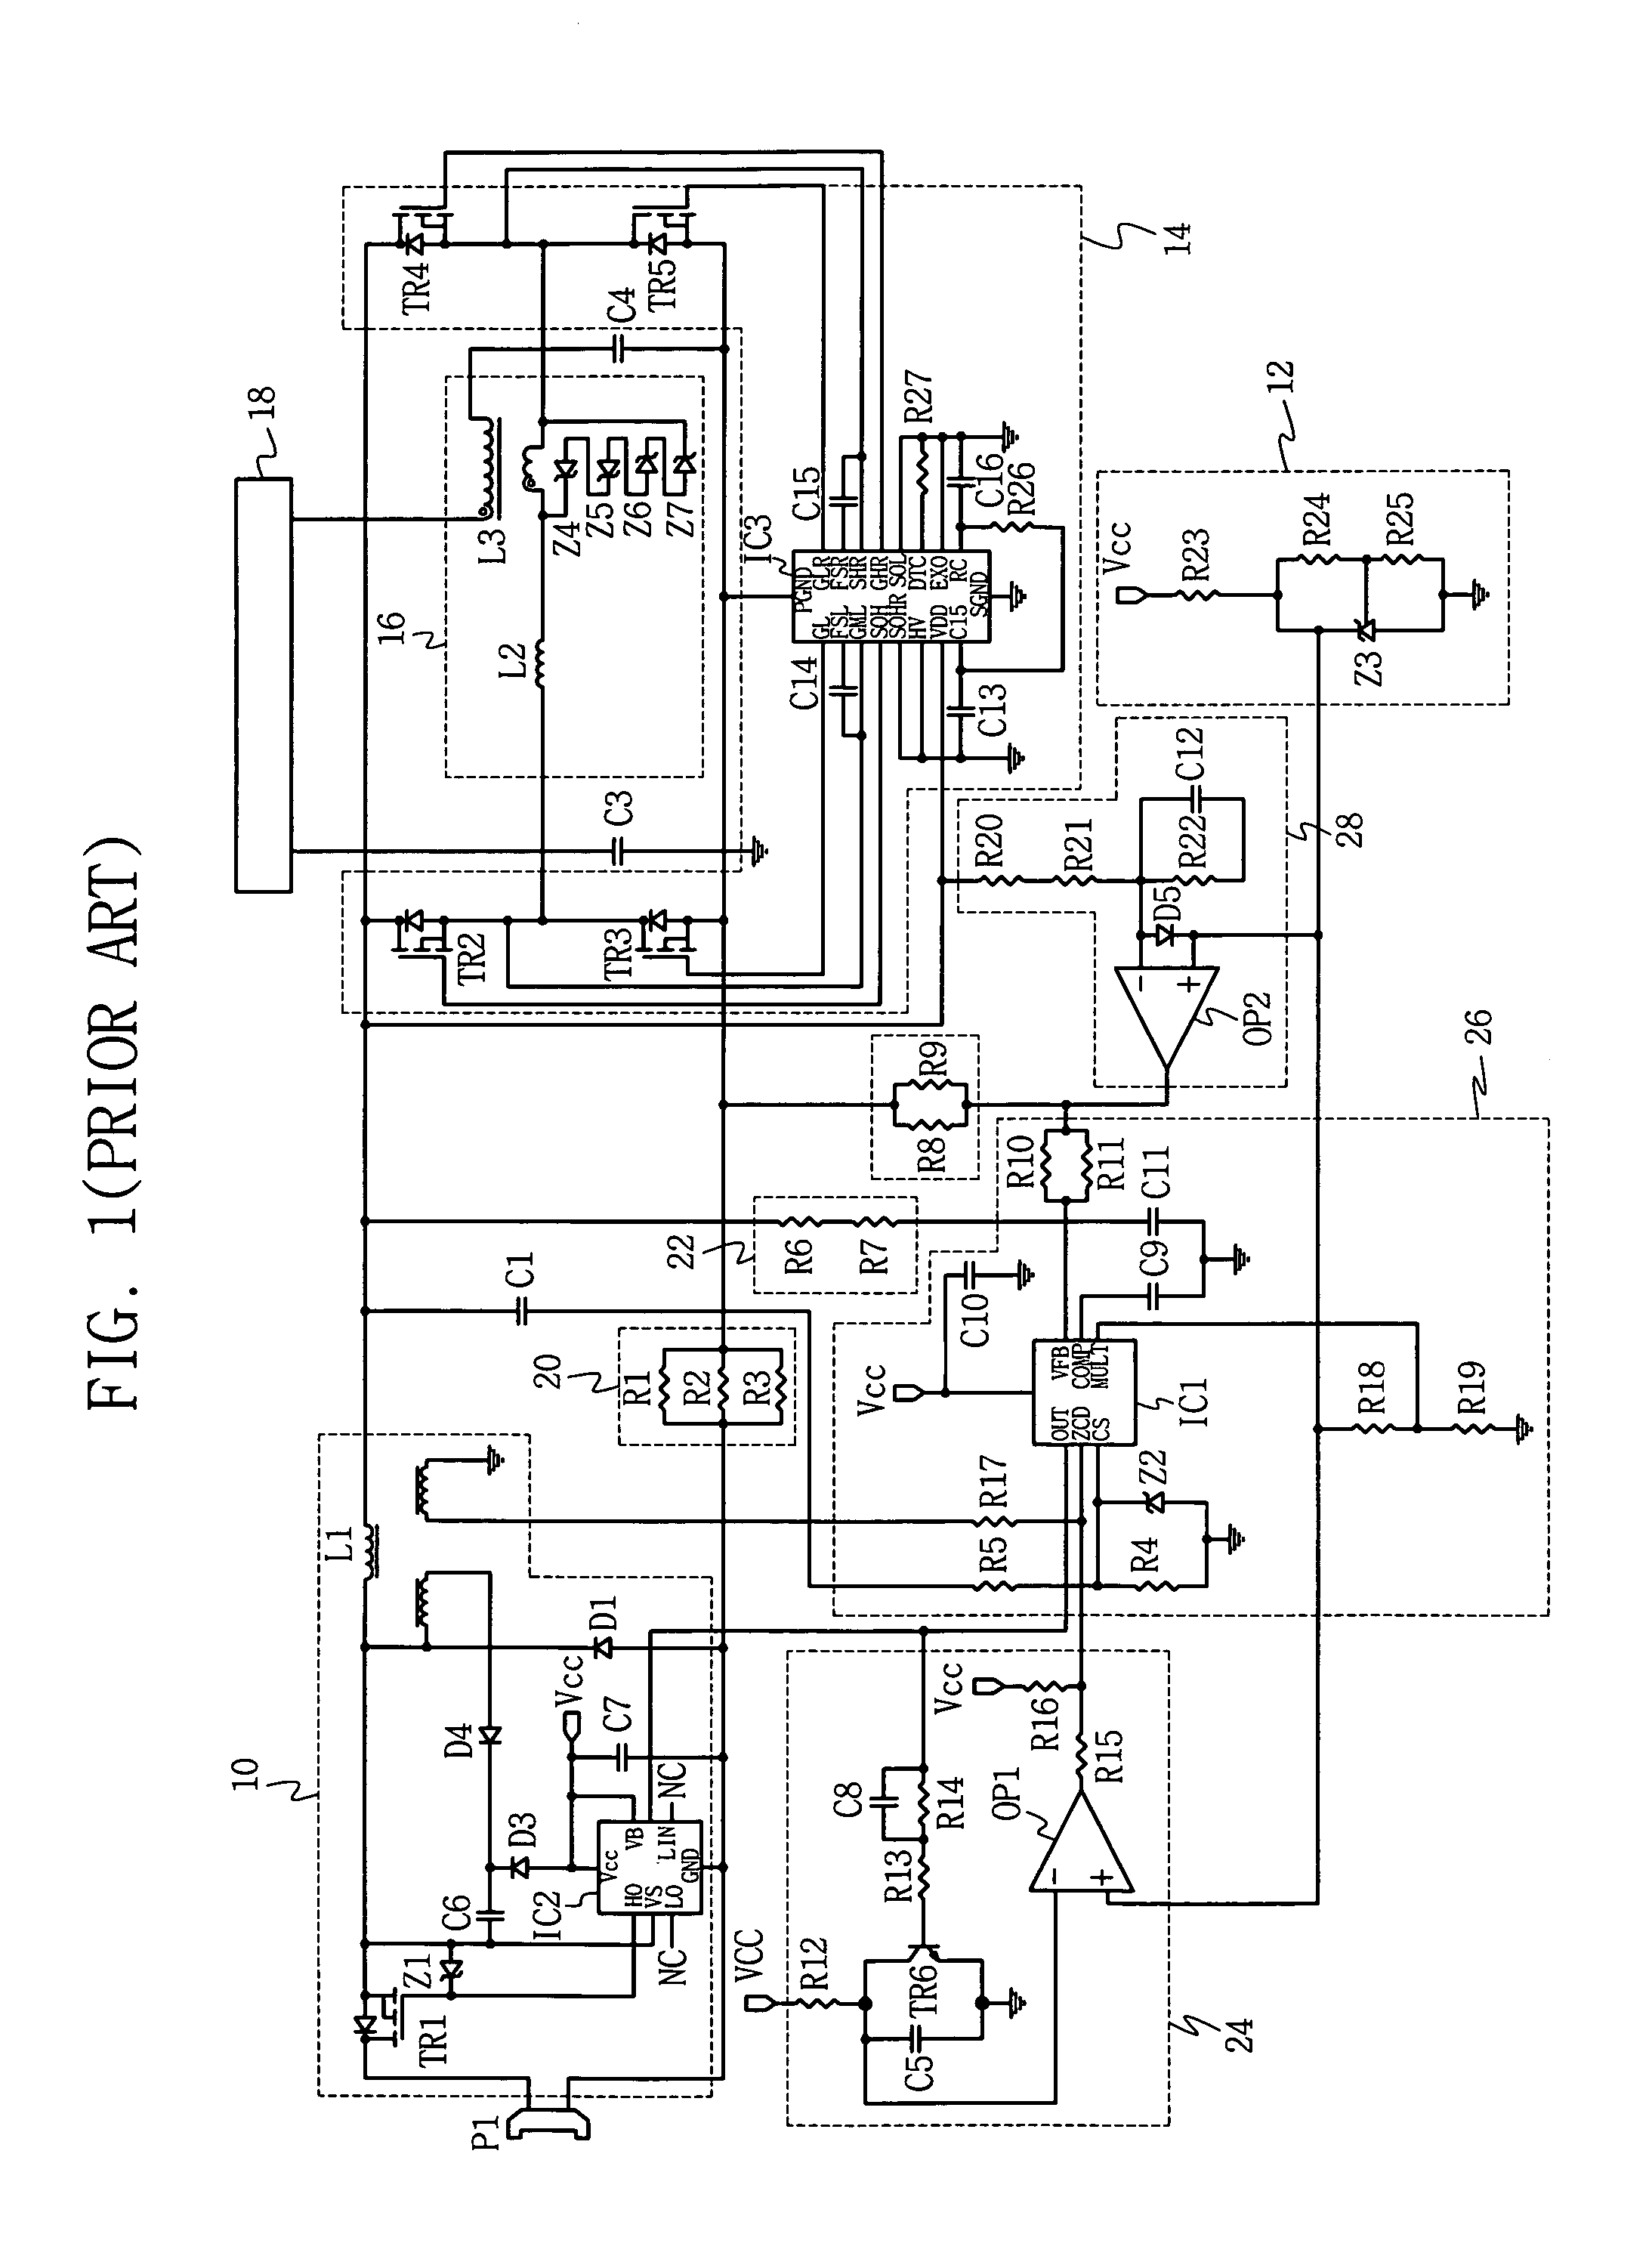 Stabilizer circuit for high-voltage discharge lamp